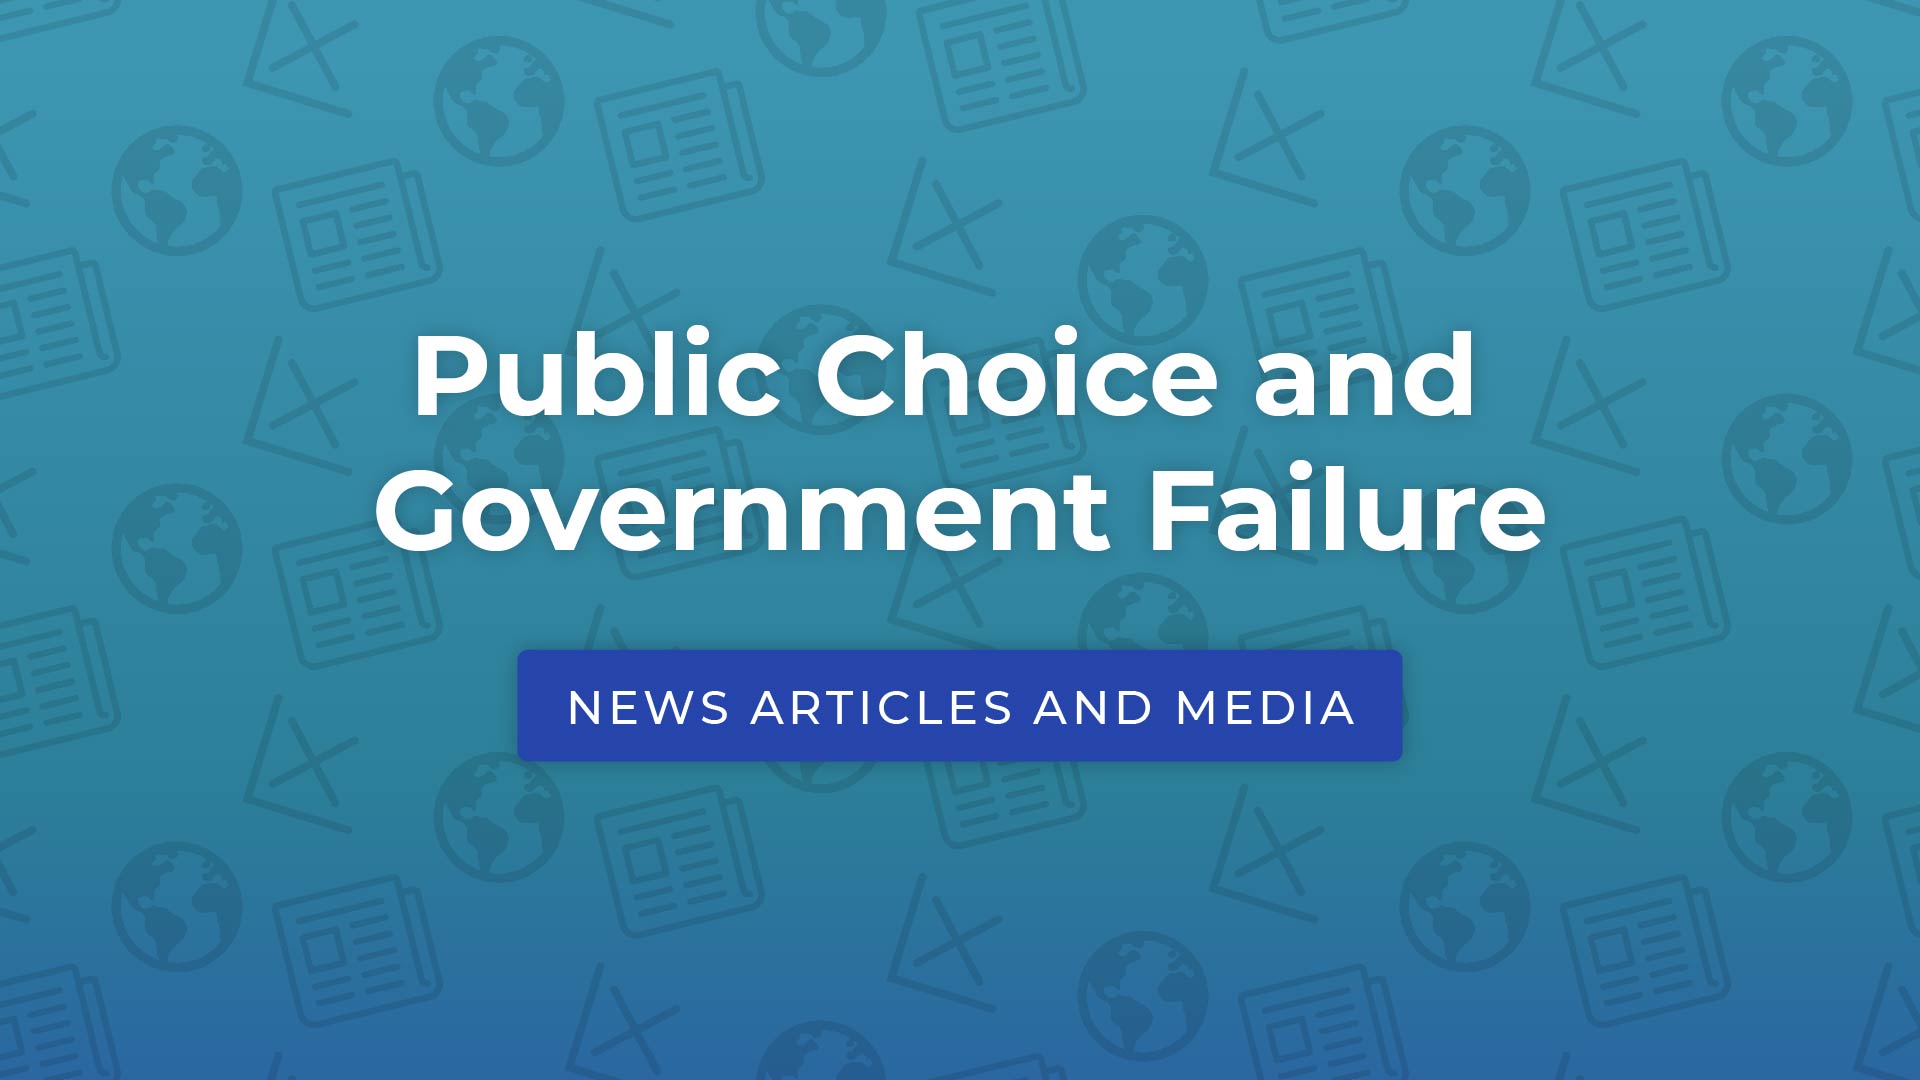 News Articles and Media: Public Choice and Government Failure ...